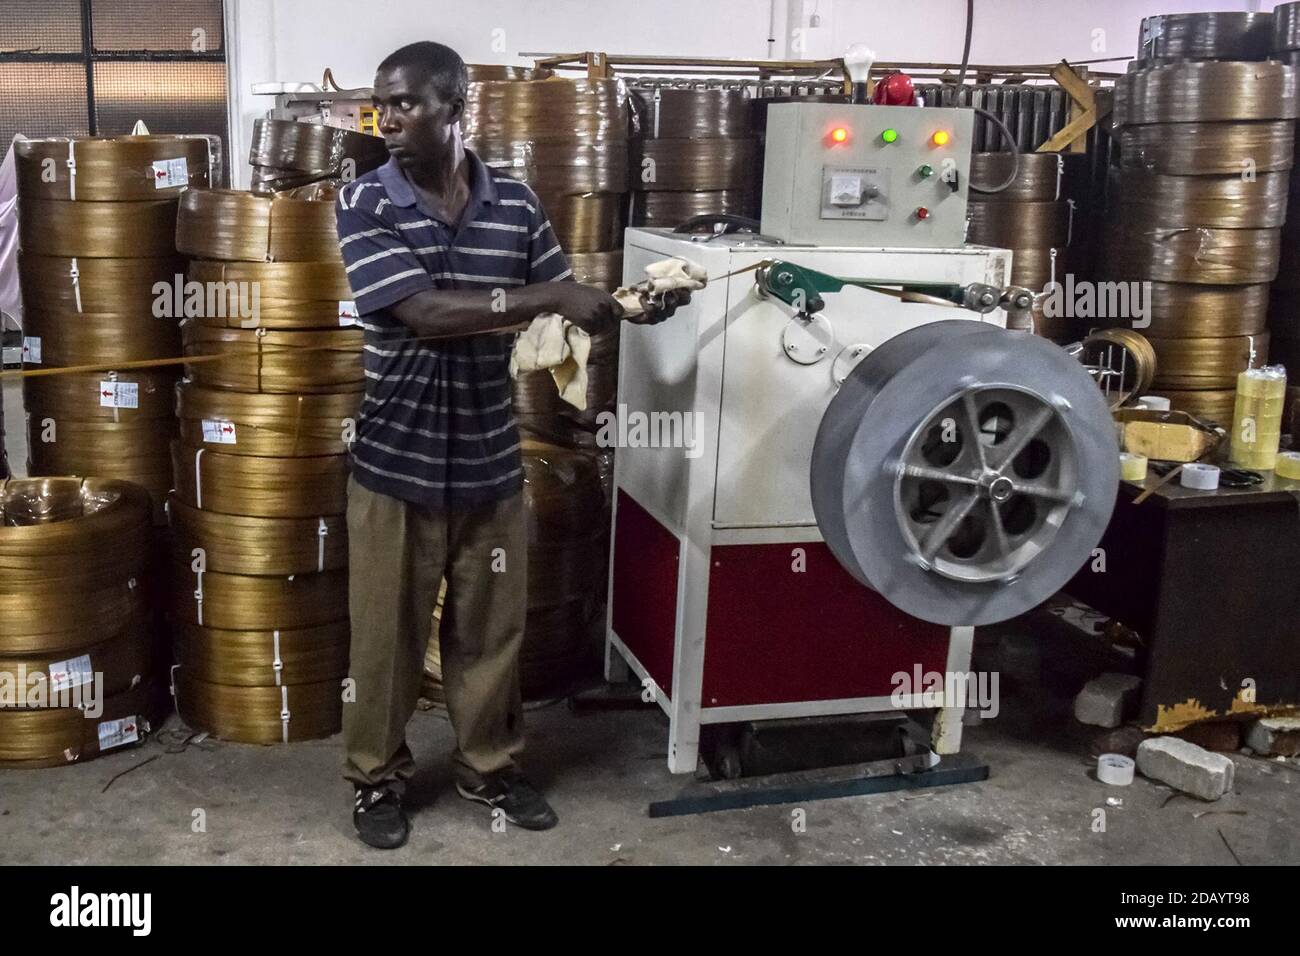 Tsungisai Magutu uses a rolling machine to create rolls of brown plastic strapping. Stock Photo